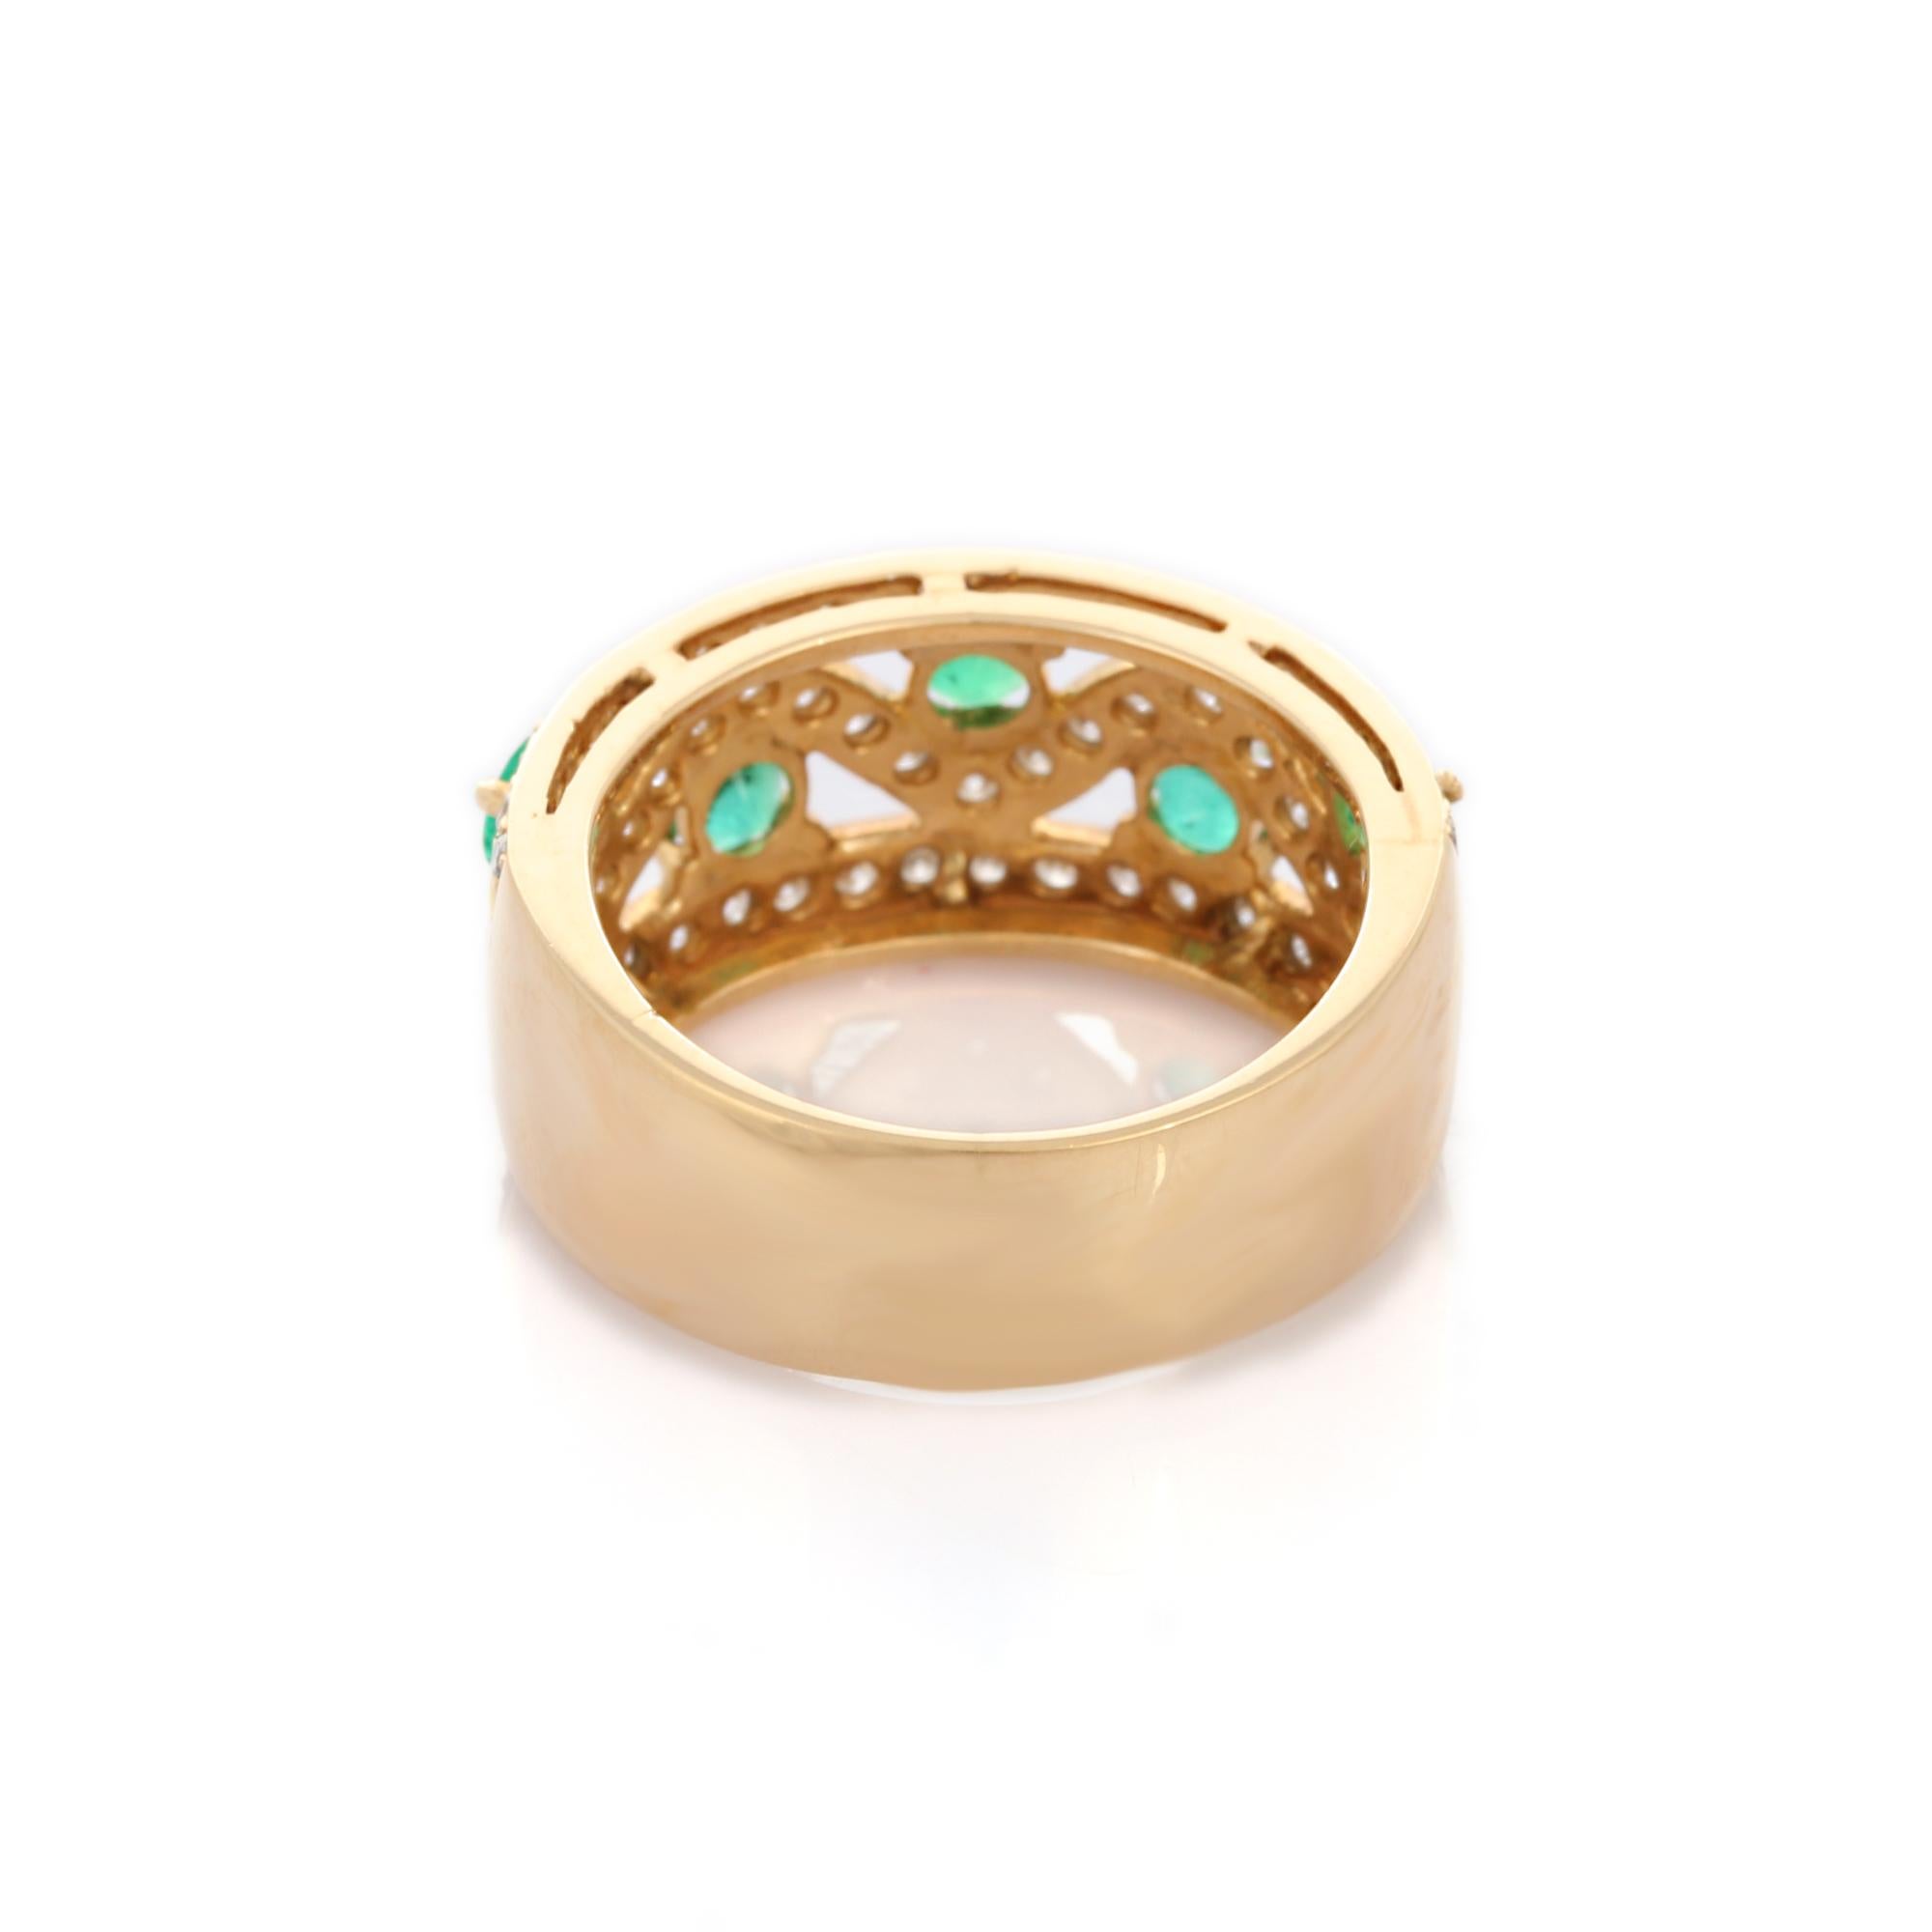 For Sale:  18K Yellow Gold Emerald and Diamond Wedding Ring 5